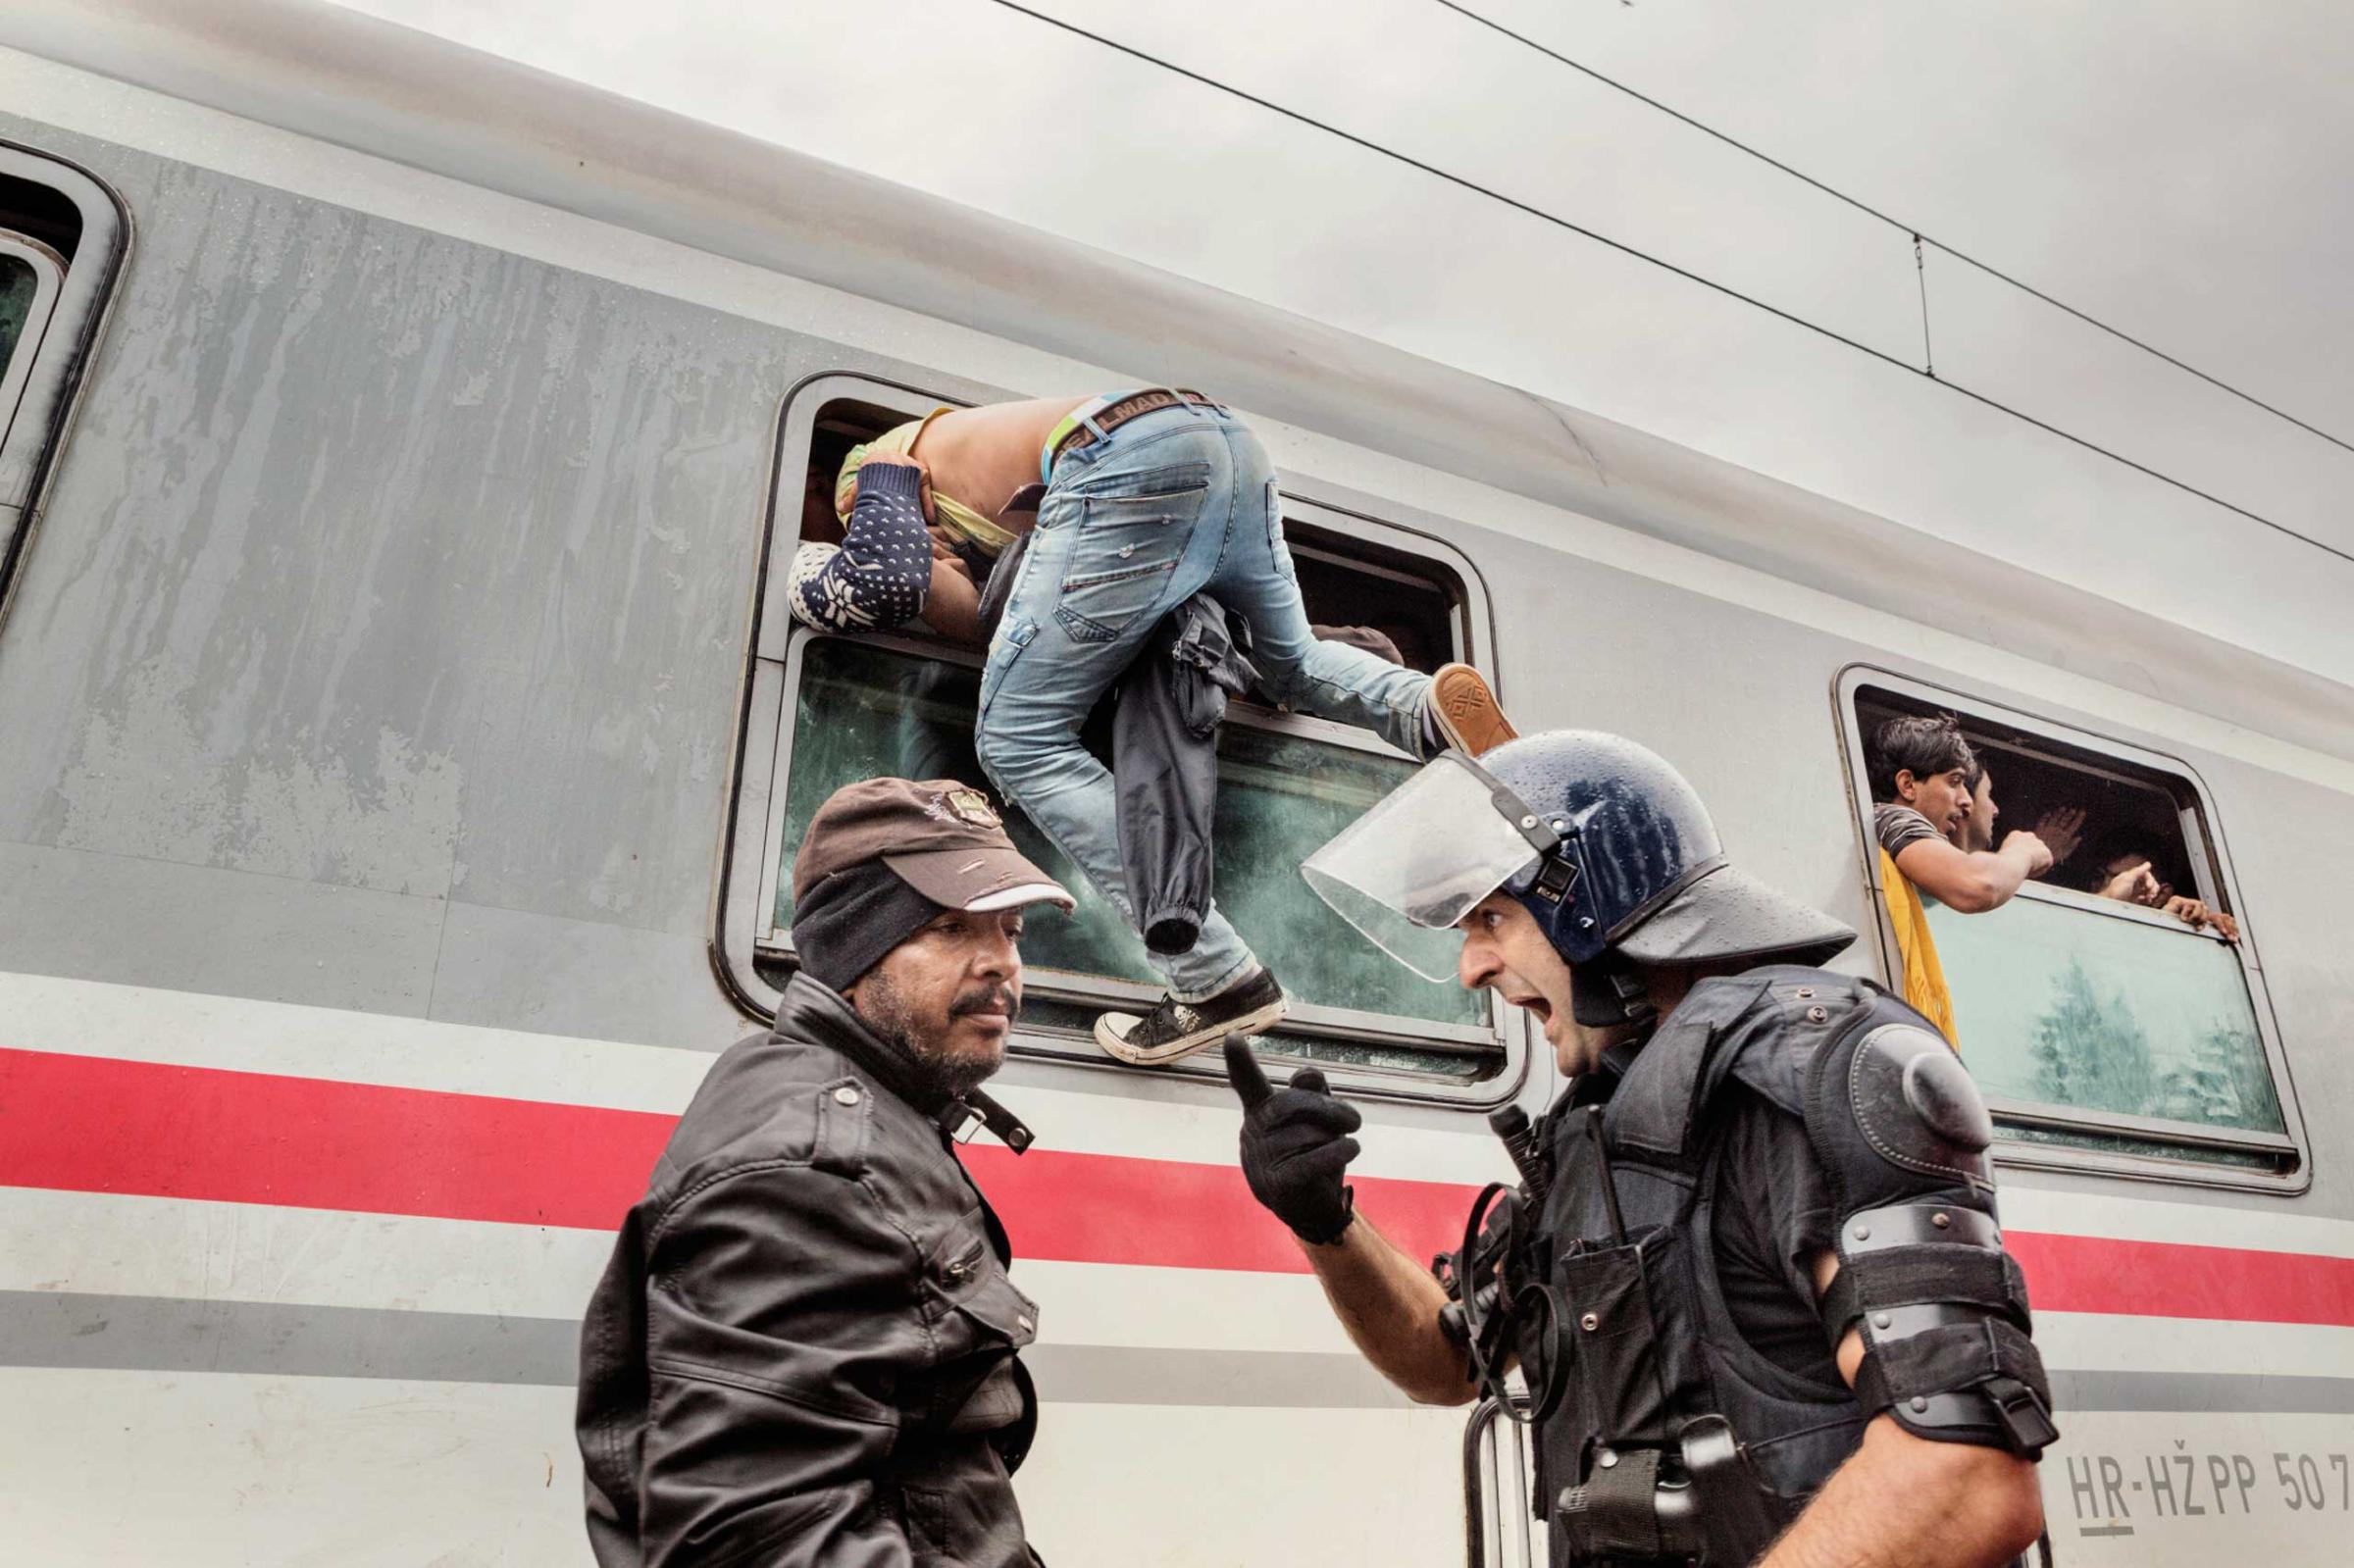 A police officer screams at a man as he attempts to board a train in Tovarnik, Croatia, Sept. 20, 2015.